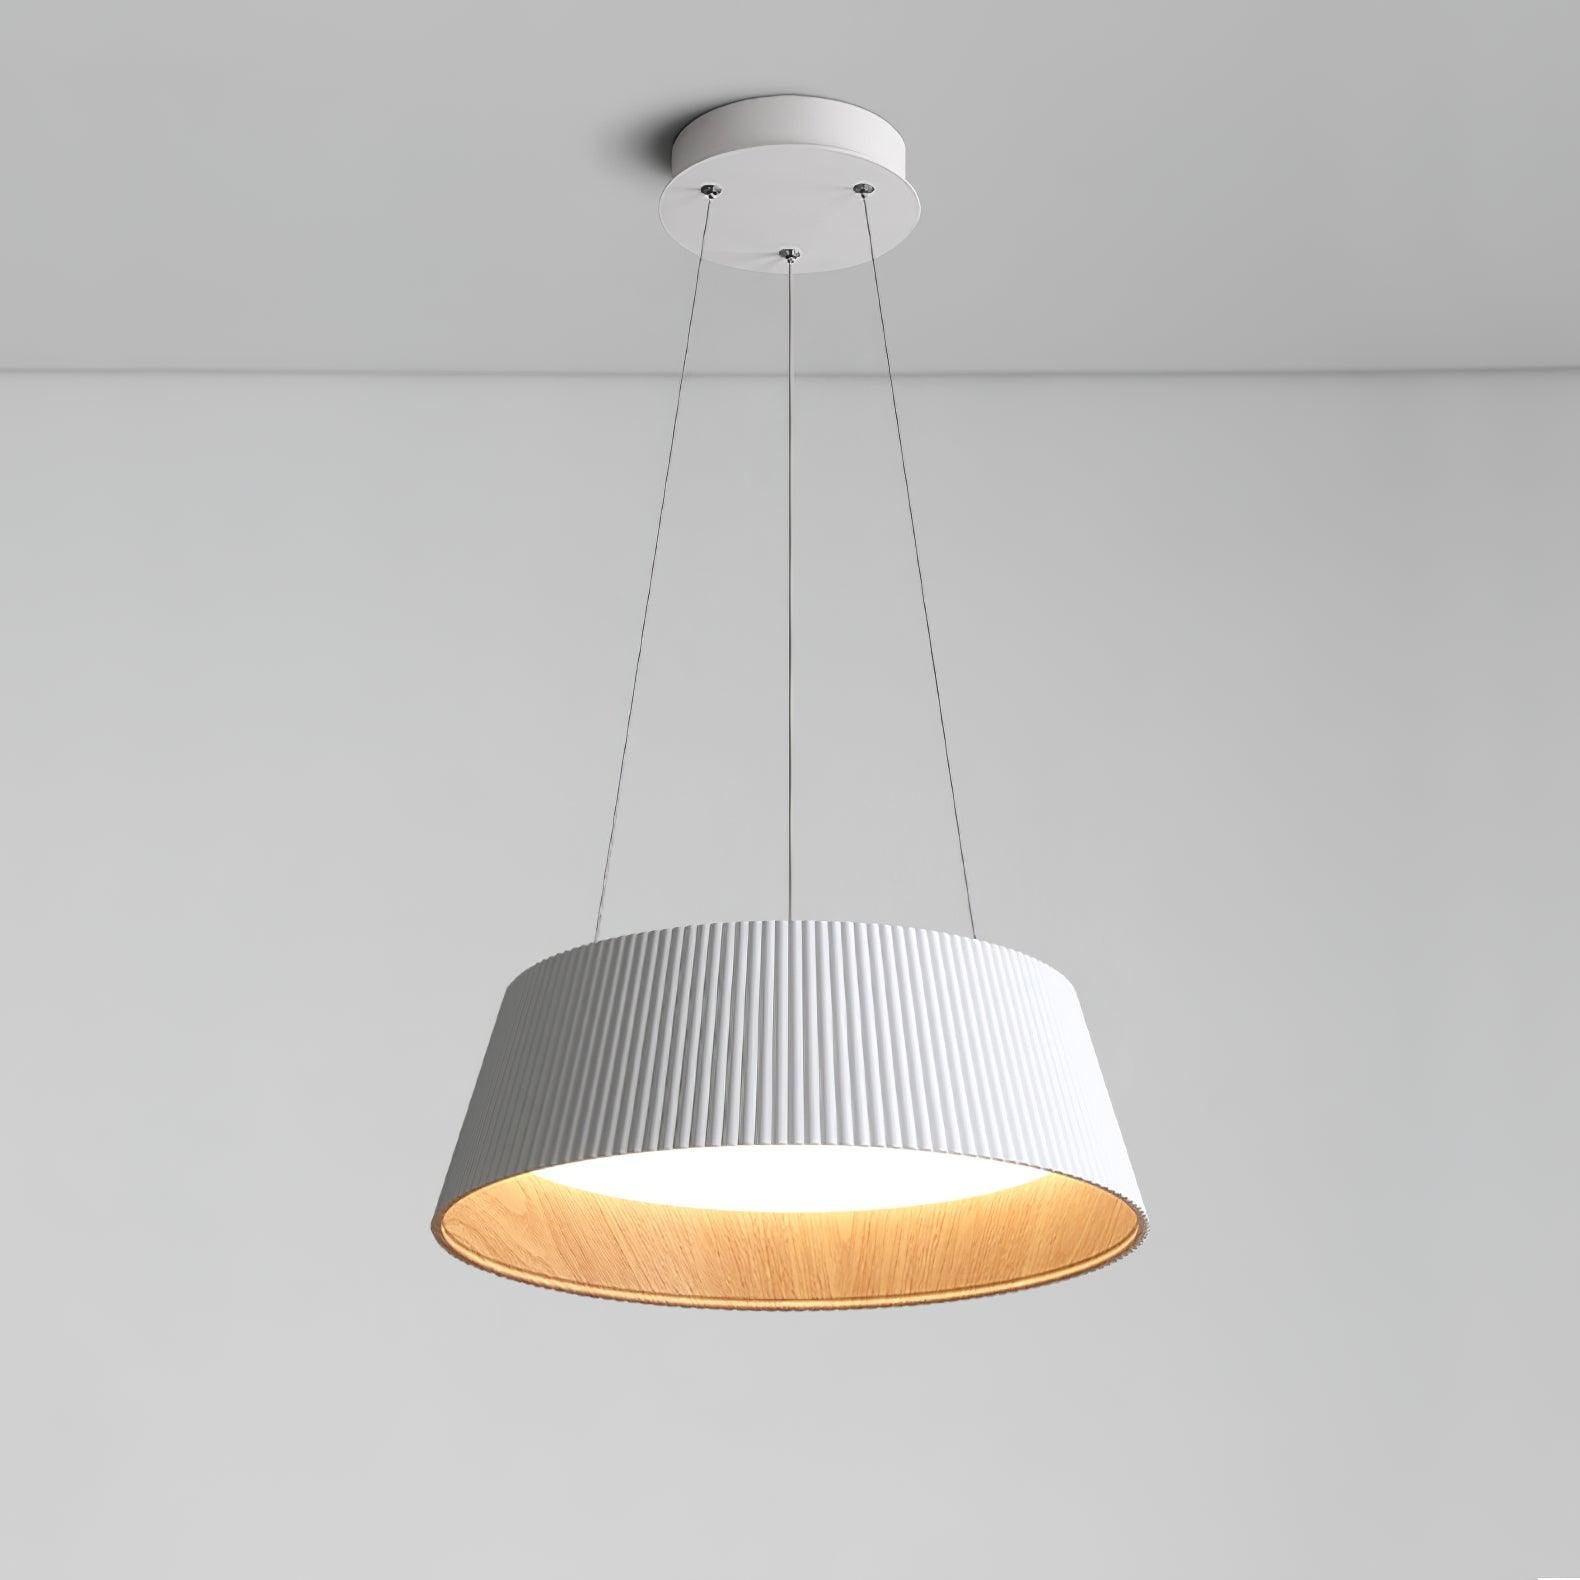 White Modern Ribbed Pendant Light with Cool Light Feature, 18.1" Diameter x 5.9" Height (46cm x 15cm)